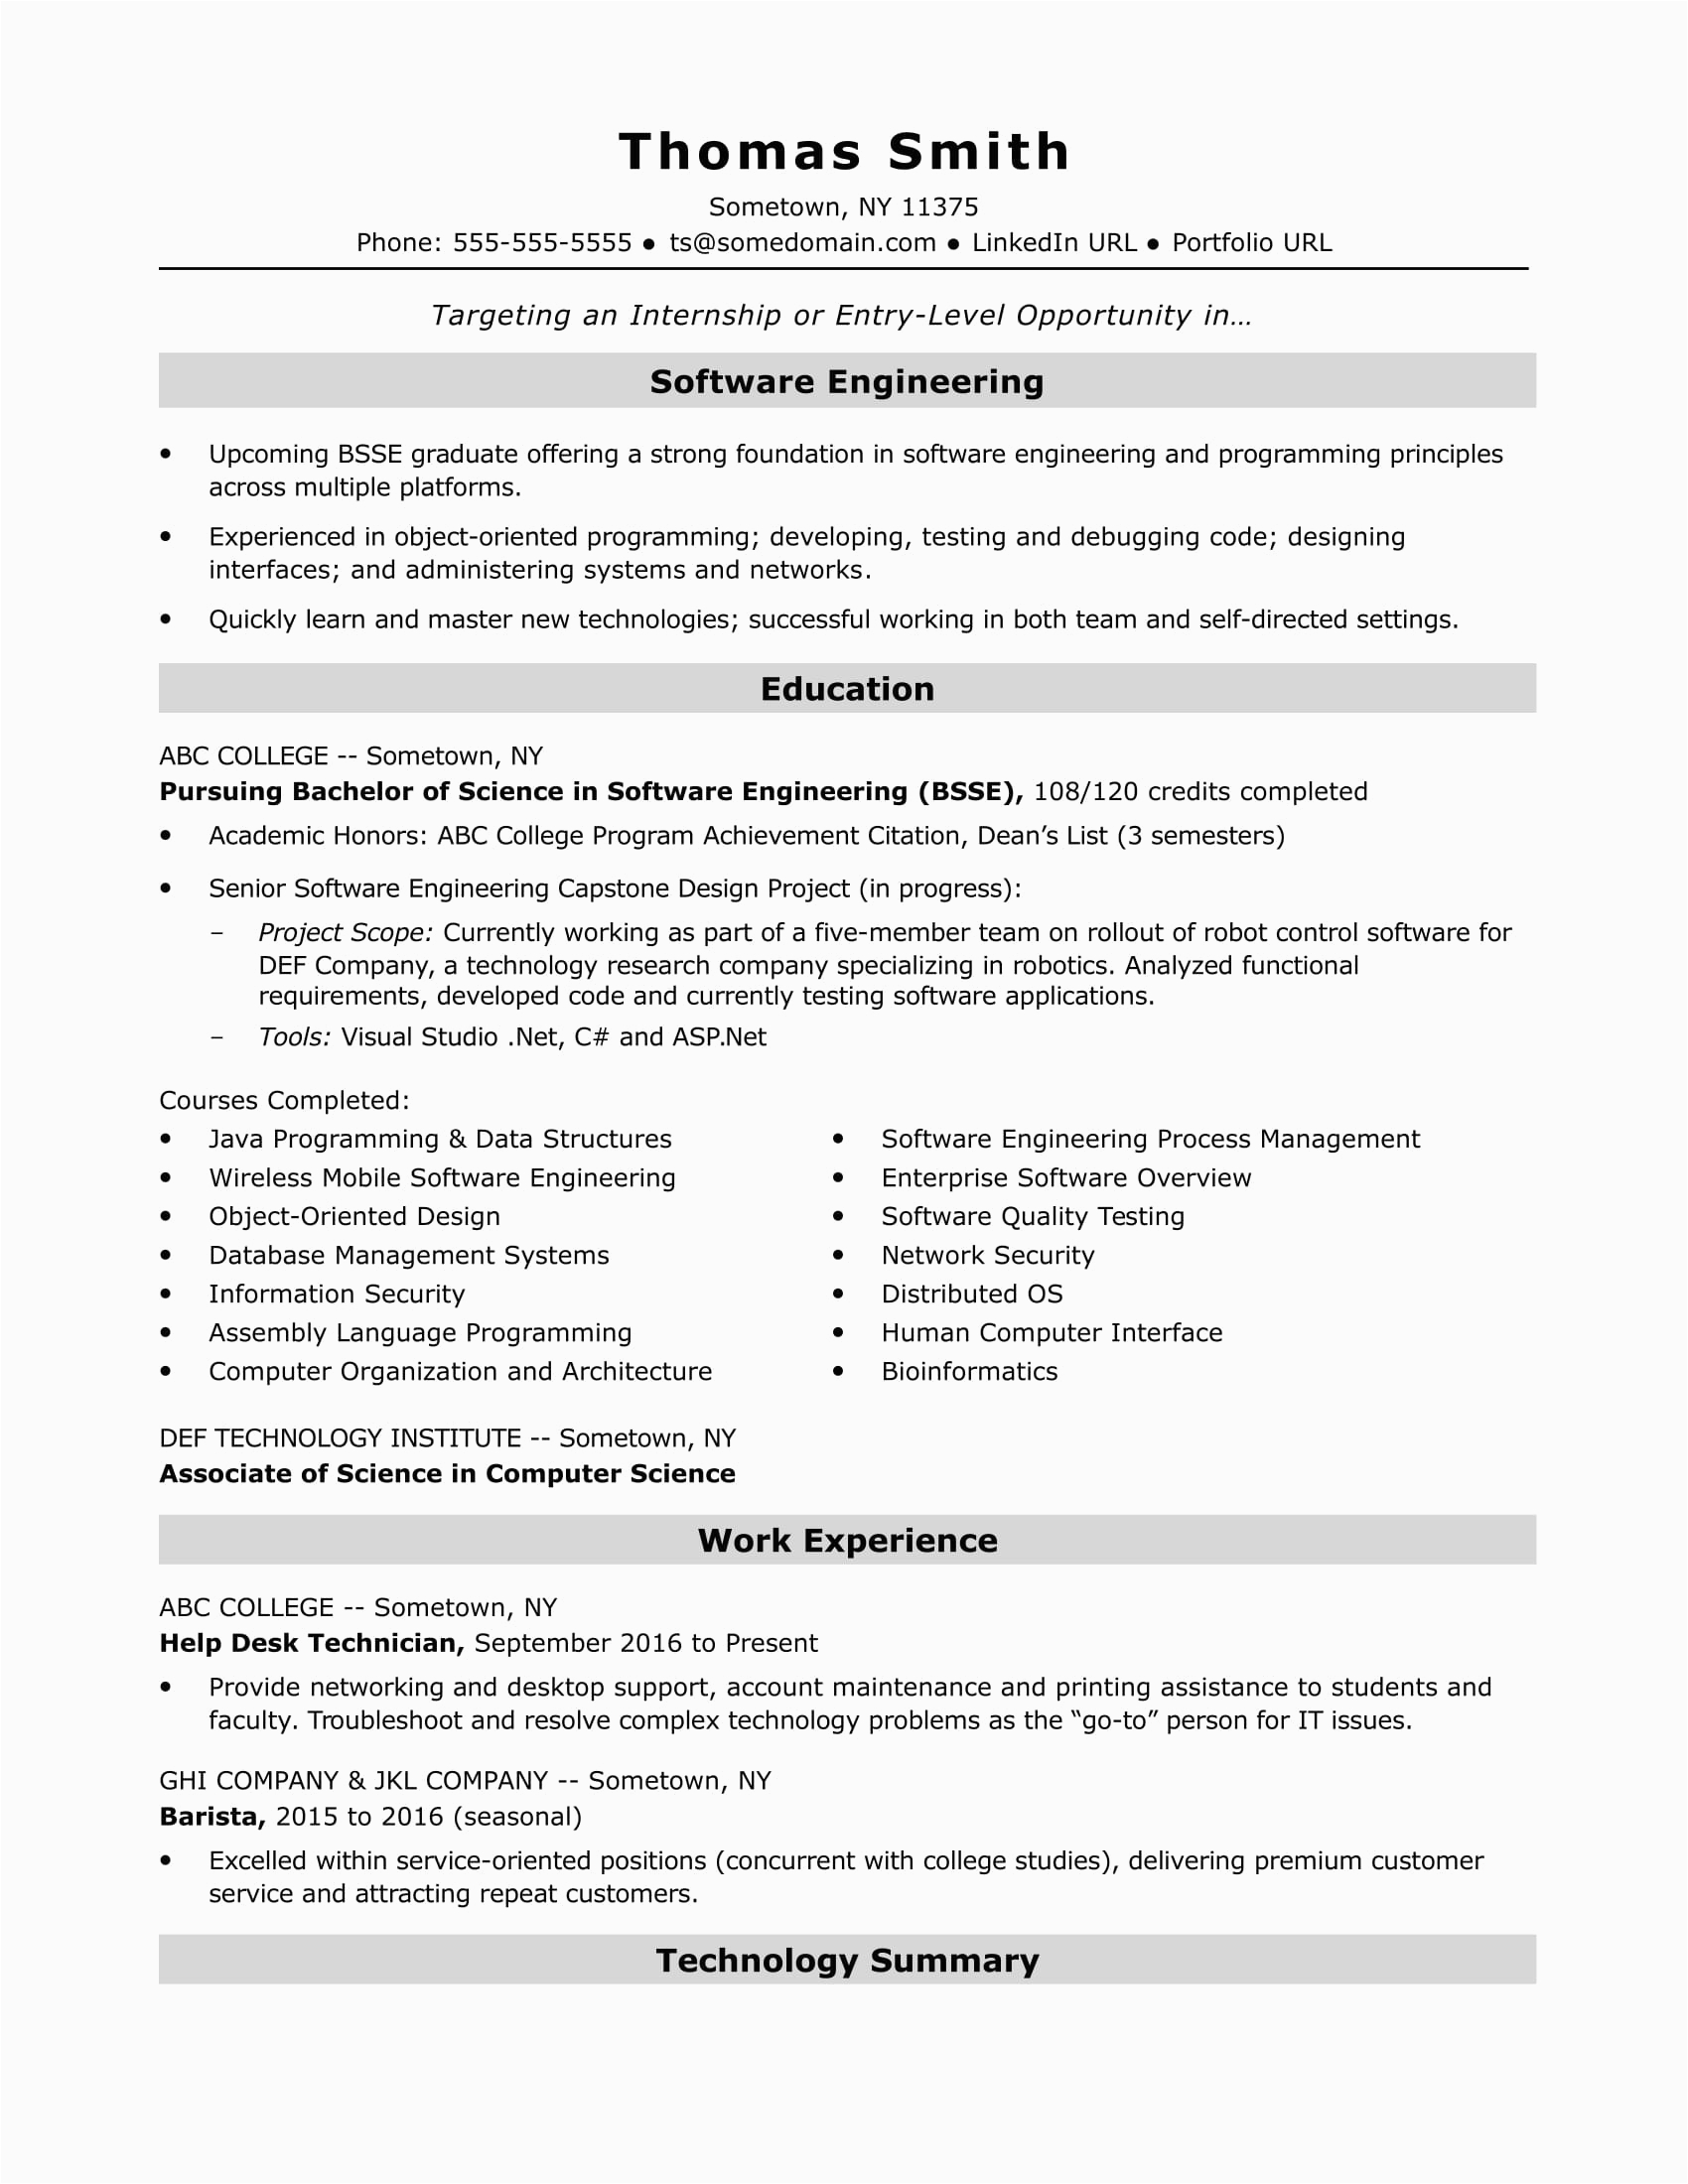 Sample Of Entry Level Engineering Resume Entry Level software Engineer Resume Sample